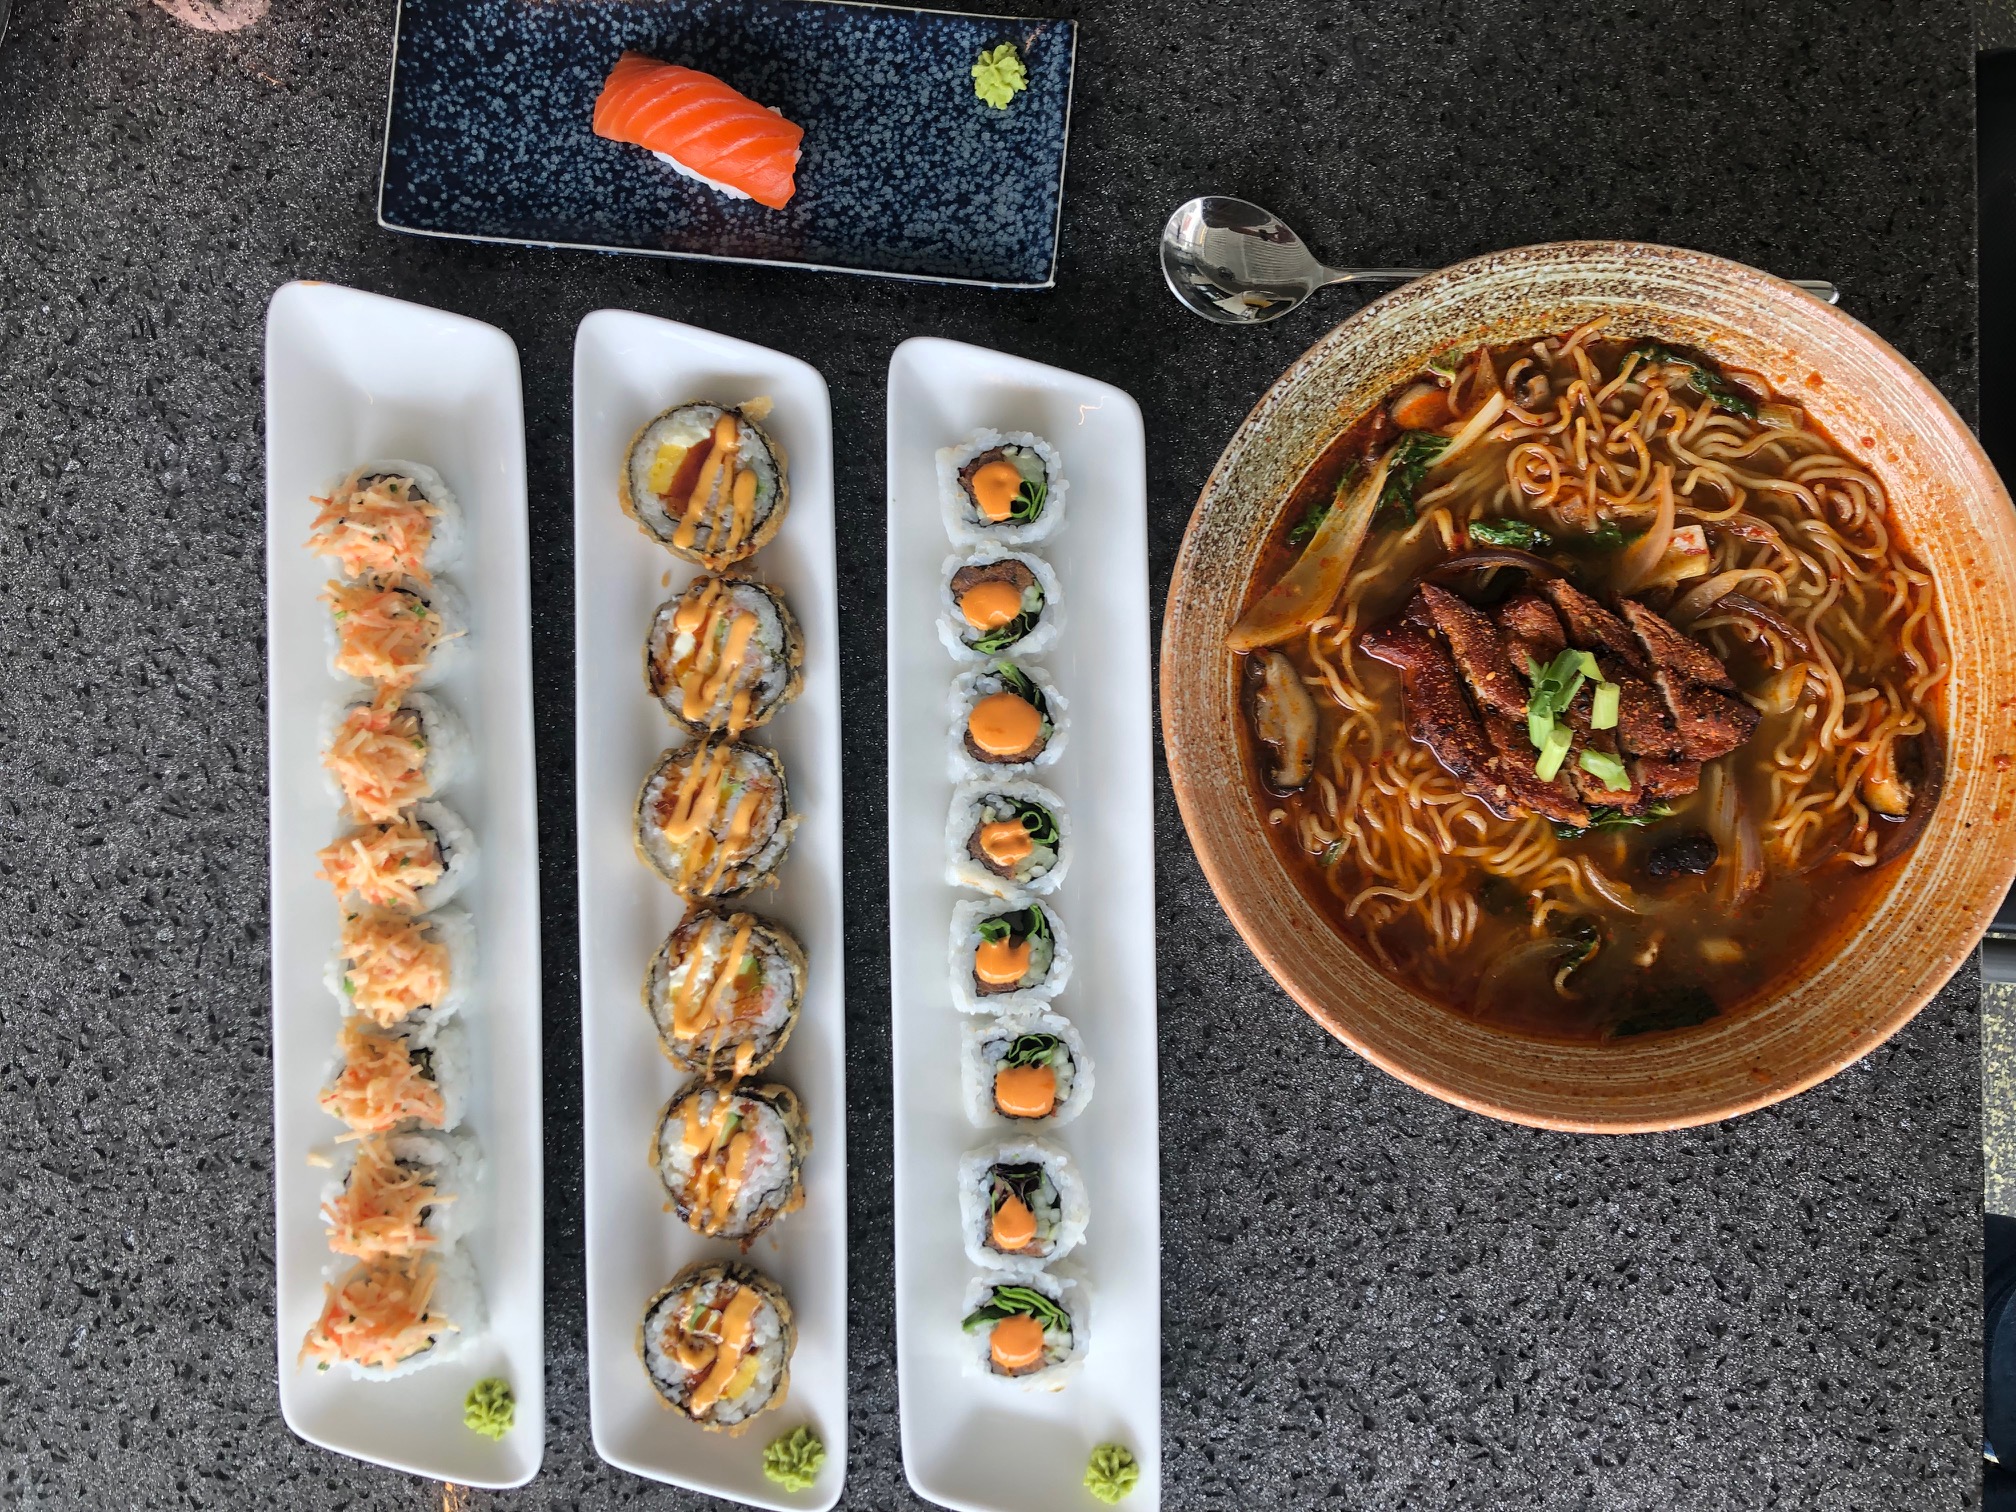 An overhead photo shows the author's lunch: pork belly ramen in a brown bowl, three sushi rolls each on their own white rectangular plate, and a small black plate holding nigiri salmon. Photo by Alyssa Buckley.